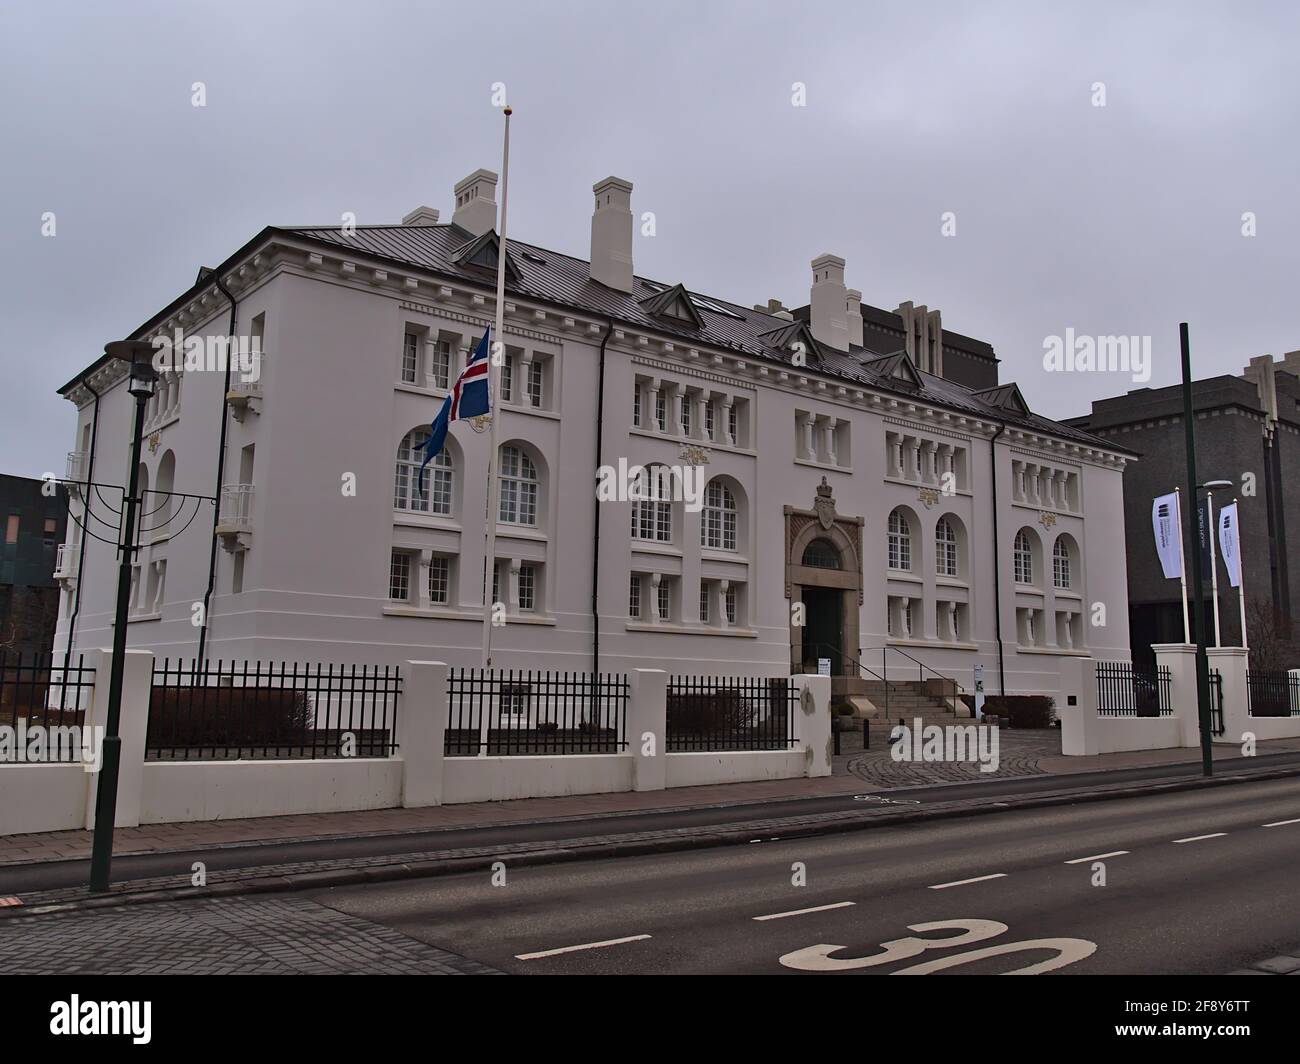 View of old building Safnahúsið (Icelandic: 'the culture house'), an exhibition space in Reykjavik city center, on cloudy winter day with empty street. Stock Photo